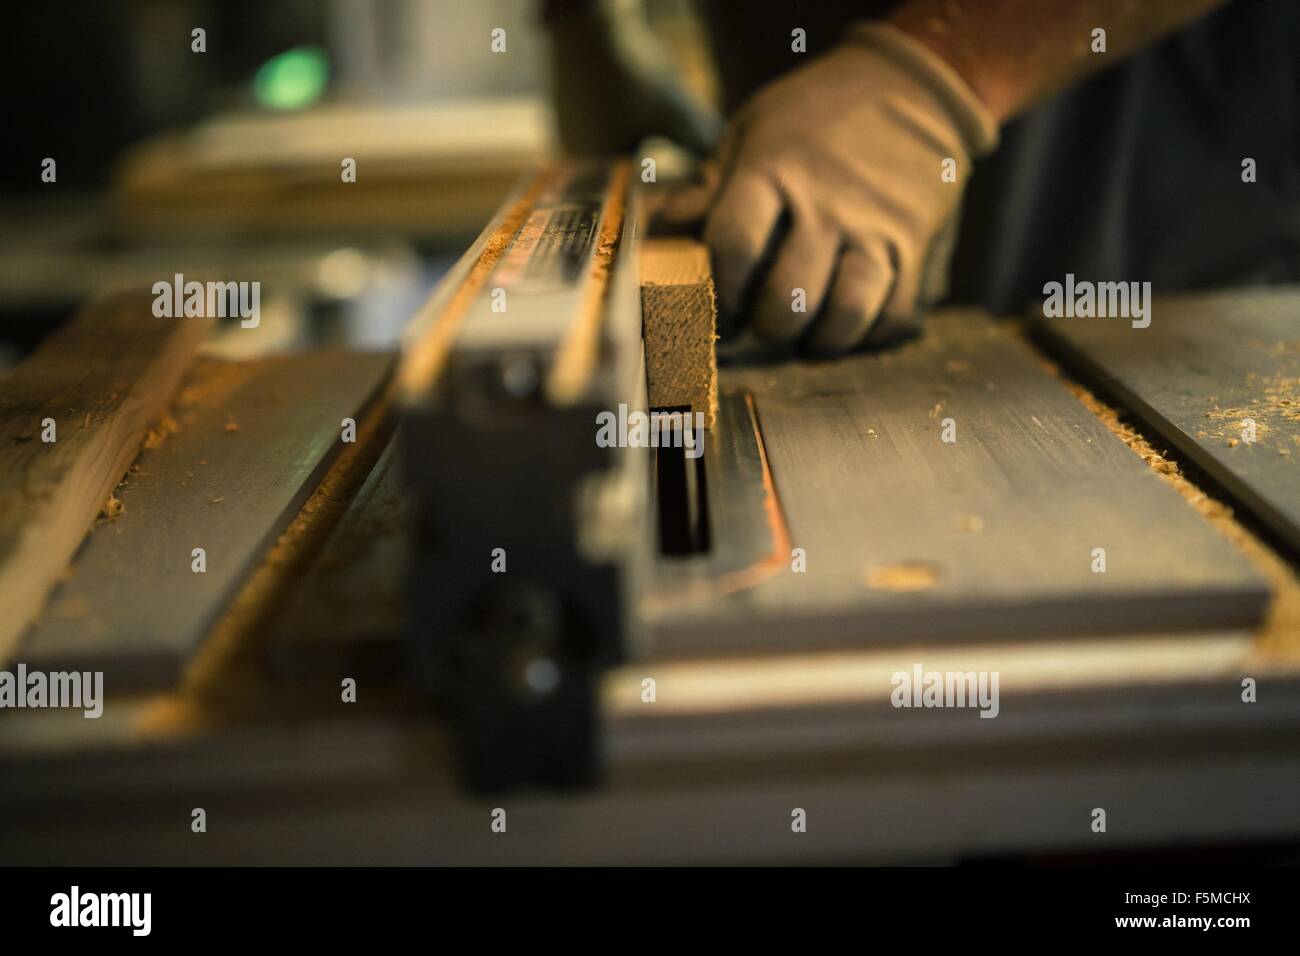 Wood artist in workshop, using woodworking machinery, mid section Stock Photo